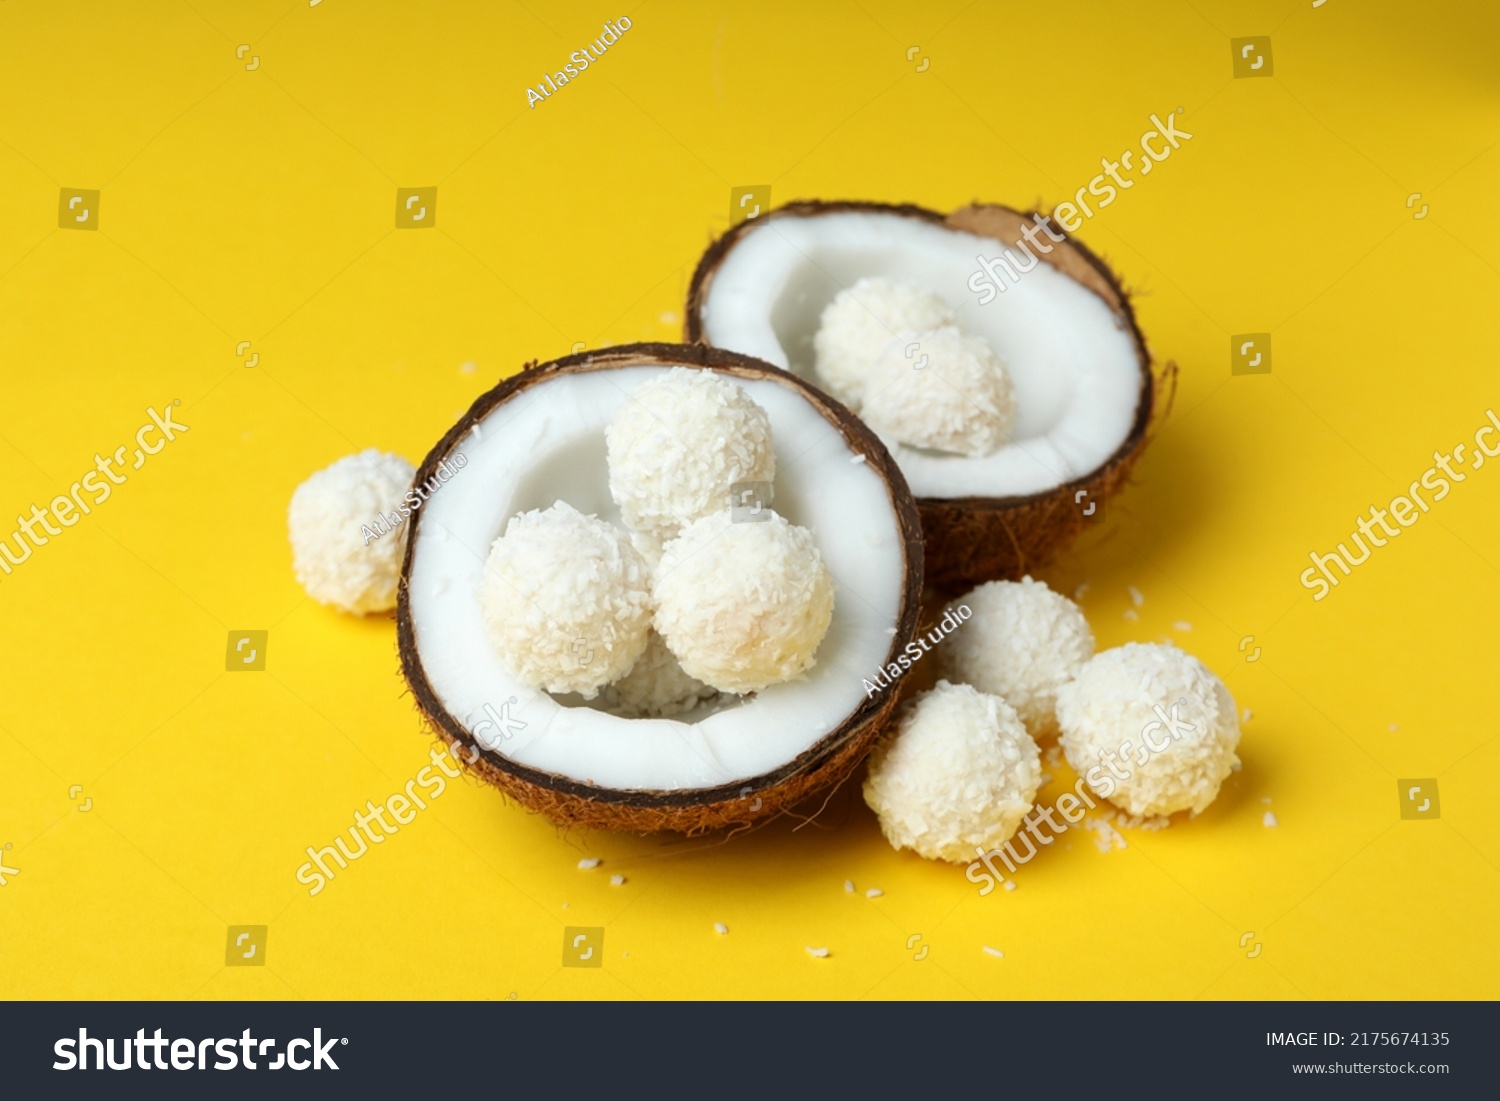 Concept of tasty sweets on yellow background, coconut candies #2175674135